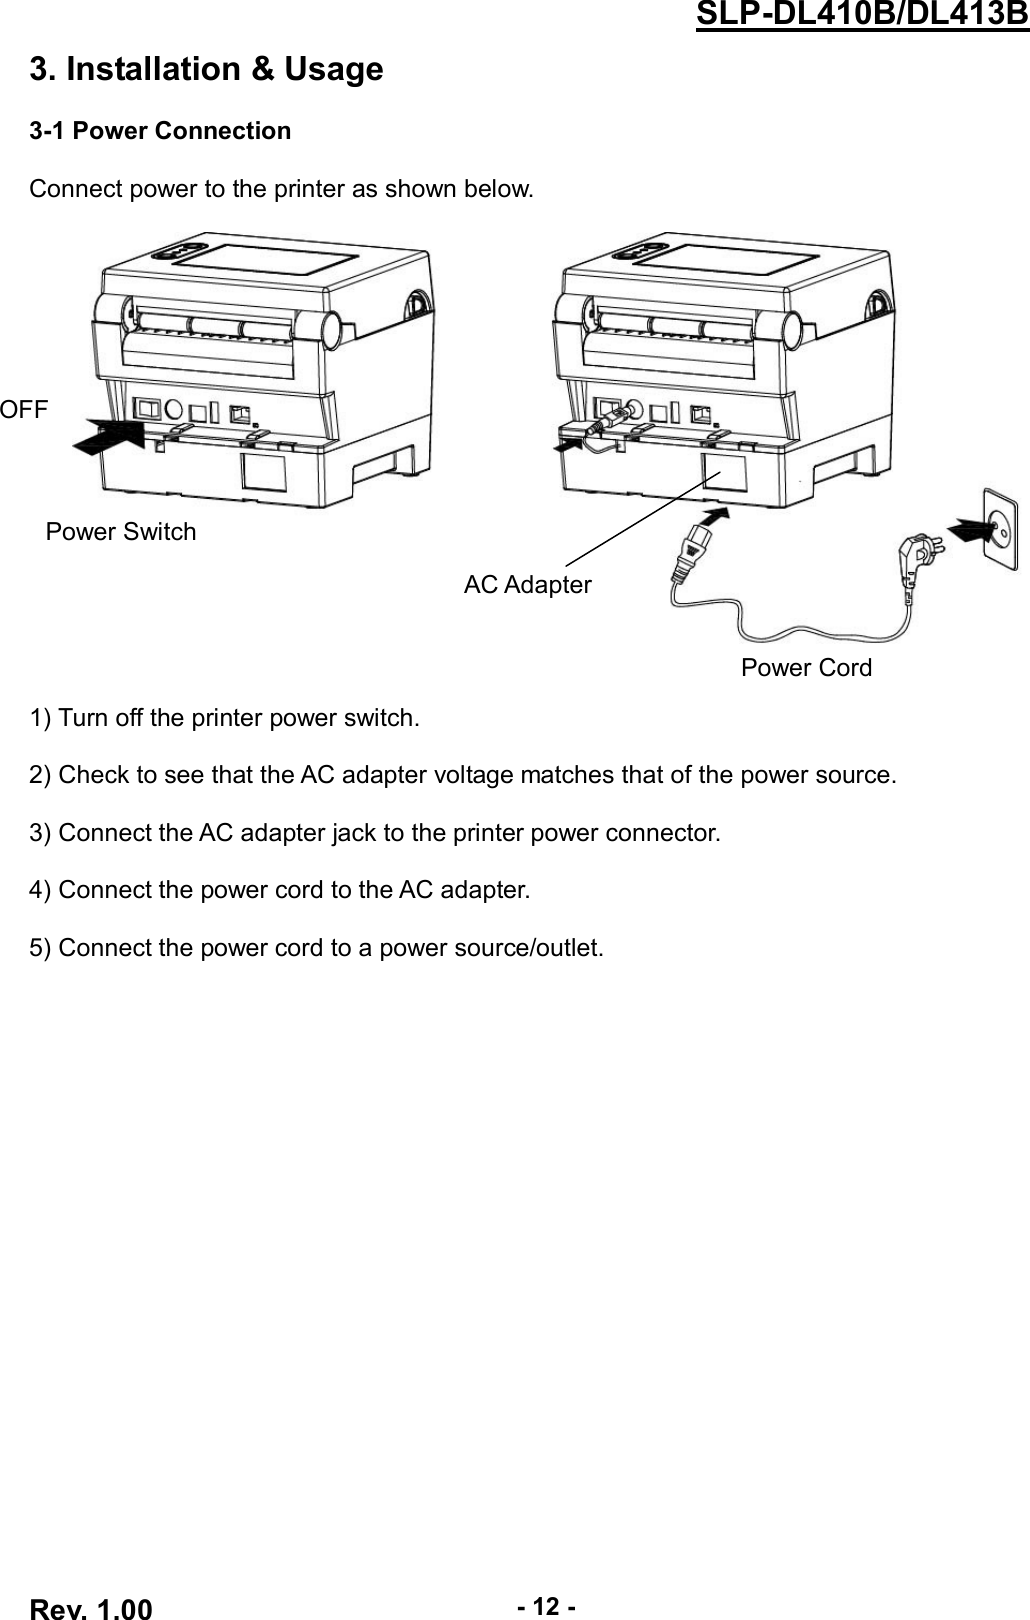  Rev. 1.00 - 12 - SLP-DL410B/DL413B 3. Installation &amp; Usage  3-1 Power Connection  Connect power to the printer as shown below.       1) Turn off the printer power switch.  2) Check to see that the AC adapter voltage matches that of the power source.  3) Connect the AC adapter jack to the printer power connector.  4) Connect the power cord to the AC adapter.  5) Connect the power cord to a power source/outlet. OFF Power Switch Power Cord AC Adapter